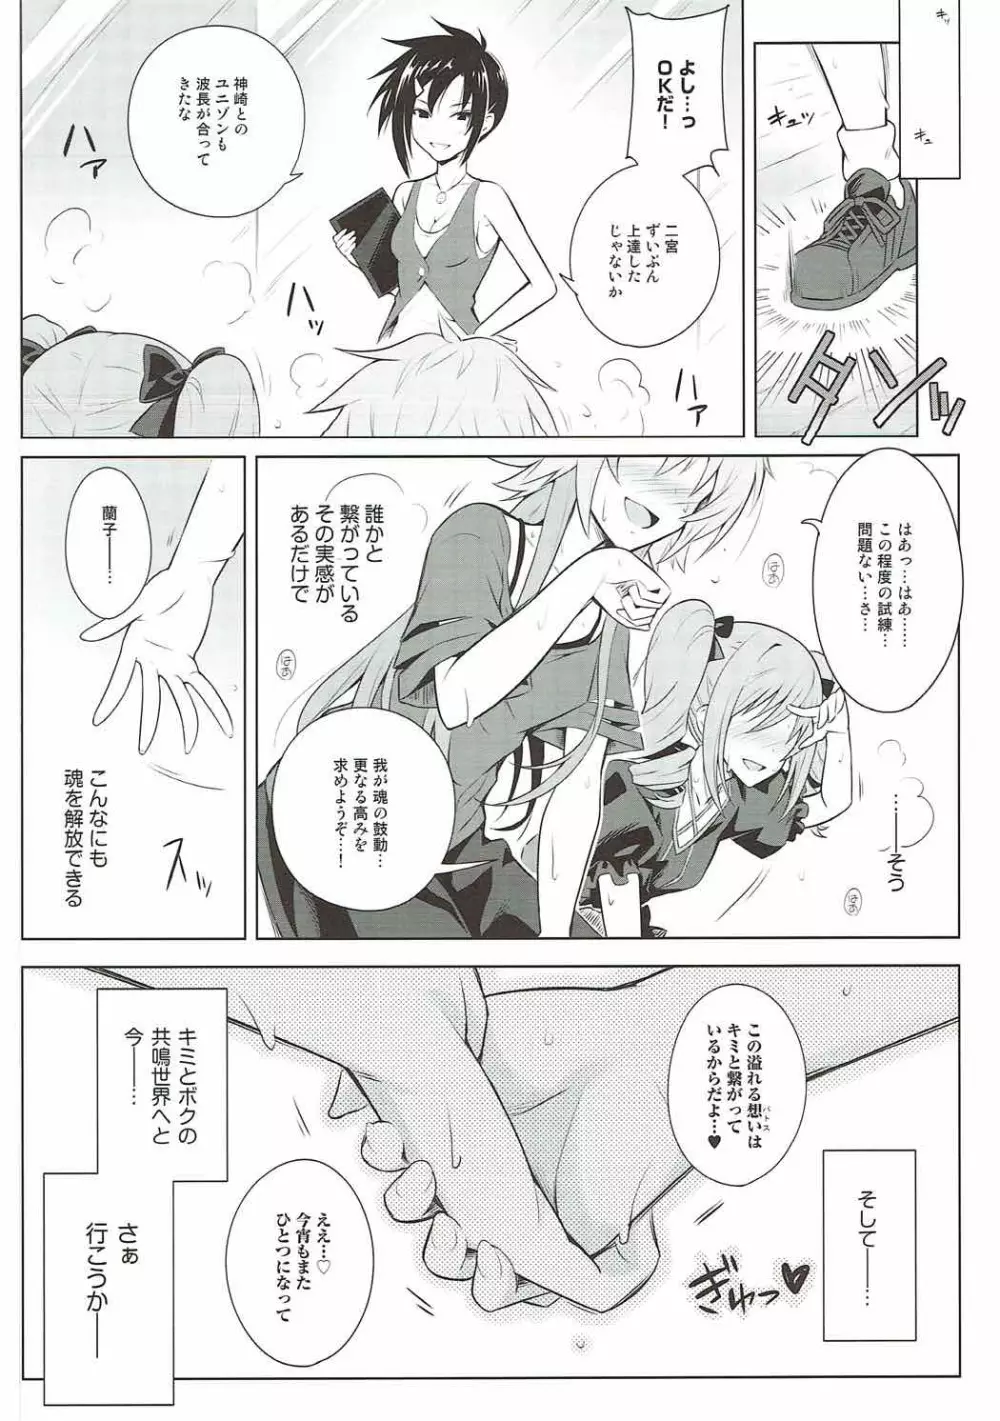 The Resonant Notes -共鳴世界の旋律符牒- - page19